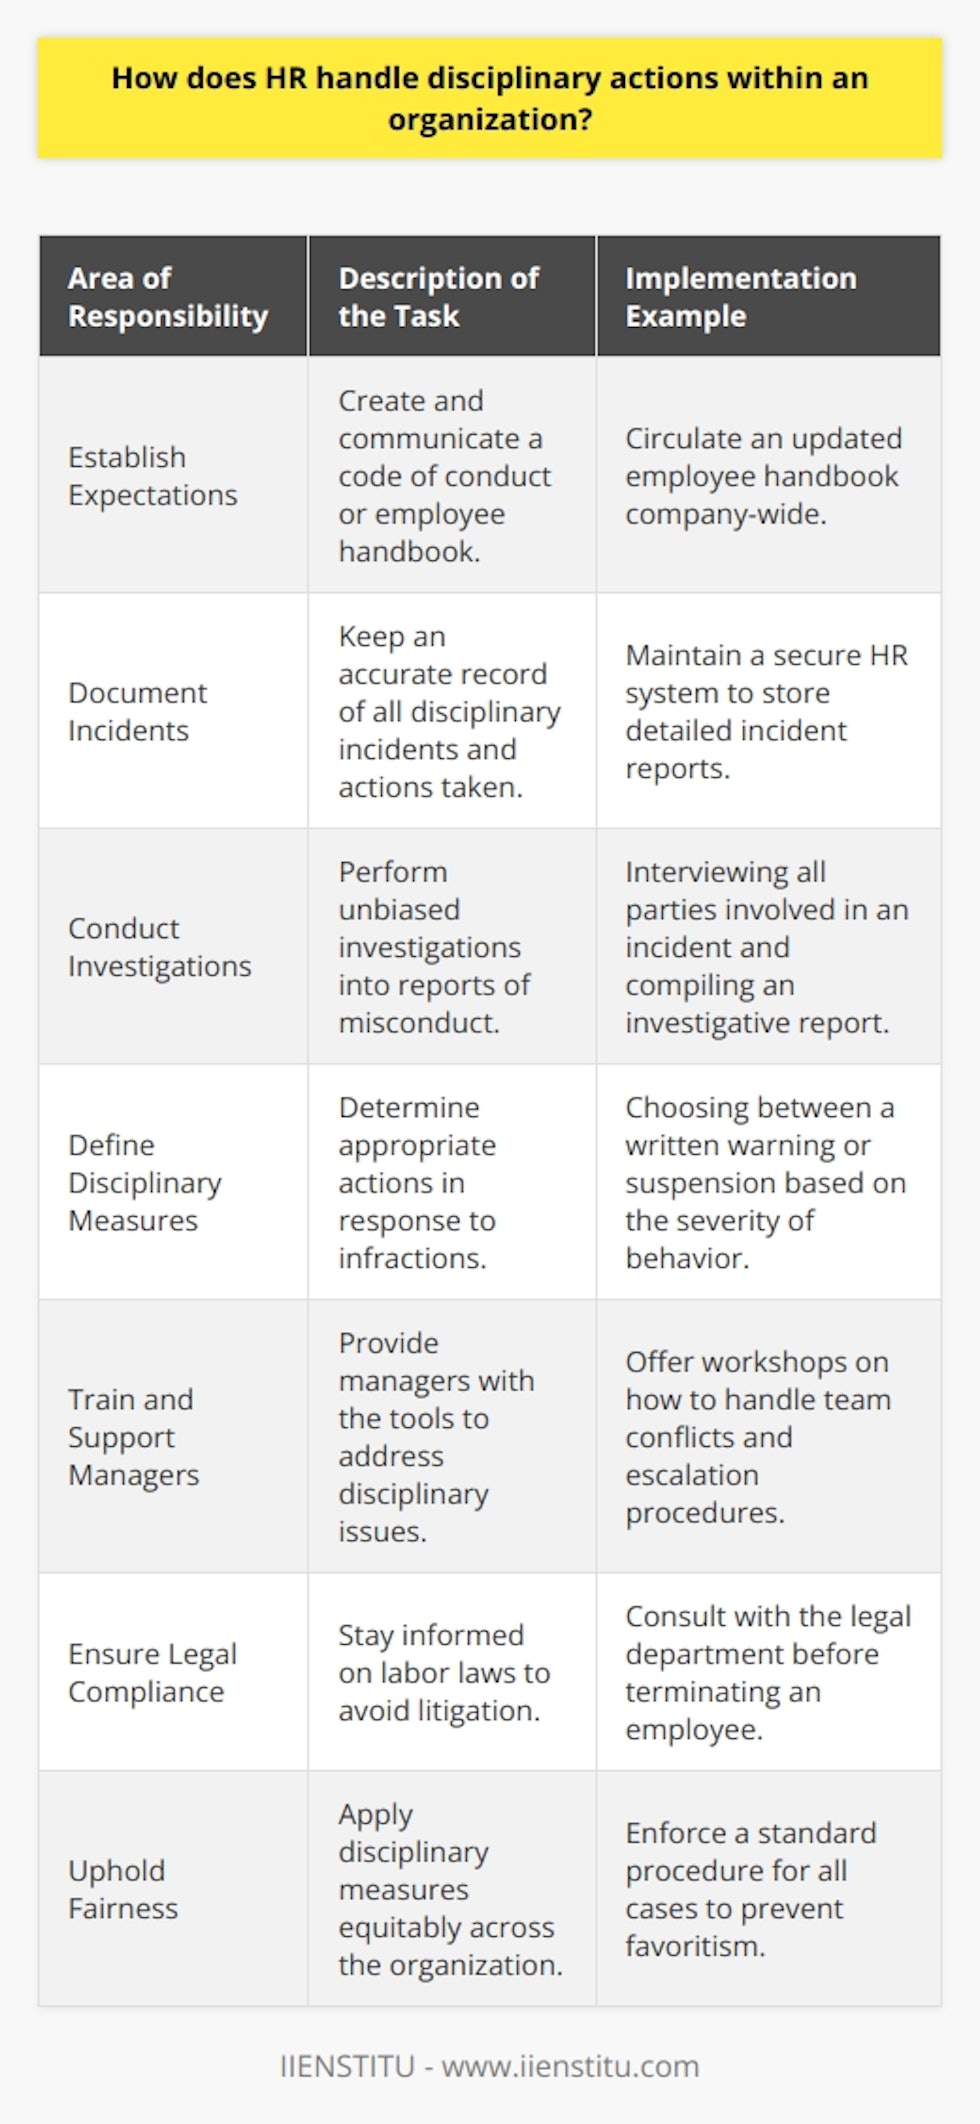 Handling disciplinary actions within an organization is a critical responsibility of the Human Resources (HR) department. The process is vital to maintaining a professional and productive work environment and ensuring that the conduct of employees aligns with the company’s values and policies. Here is a closer look into how HR handles disciplinary actions within an organization:**Roles and Responsibilities of HR**The HR team has a duty to establish a clear framework of expectations regarding employee behavior. This framework is typically communicated through a code of conduct or employee handbook which outlines acceptable and unacceptable behavior at work. HR’s role includes creating these documents and ensuring that they are regularly updated and in line with the changing norms and legal requirements.**Process of Disciplinary Actions**Disciplinary actions typically follow a progressive discipline policy. This process may begin with an informal conversation to correct behavior and can progress to more formal written warnings, suspension, and ultimately, termination if necessary. HR's role in this is manifold:1. **Incident Documentation:** Documenting the details of incidents, warnings, and disciplinary meetings is crucial. Such documentation should be objective, void of biases, and contain facts about the incident, the involved parties, and the action taken.2. **Fair Investigation:** When allegations of misconduct arise, HR must conduct a fair and prompt investigation. They gather information from all relevant parties and ensure that the process is transparent to avoid any sense of bias or preferential treatment.3. **Defining Disciplinary Measures:** HR is responsible for deciding the proper disciplinary action based on the severity of the infraction. They work with the legal team, if necessary, to ensure these measures are legal and justifiable.**Training and Support**One of the roles of HR is to ensure that line managers and supervisors are equipped to handle disciplinary issues at the initial stages. HR may offer training sessions or tools that help managers identify, address, and document disciplinary matters efficiently and legally, thus empowering them to maintain discipline within their teams.**Legal Compliance**Disciplinary actions must always be compliant with the law. HR professionals need to be knowledgeable about employment and labor laws to protect the organization from litigation due to wrongful termination or discrimination claims. They must ensure that any action taken is not only justified but also non-discriminatory and applied equitably among all employees.**Ensuring Fairness**Consistency and fairness are essential in disciplinary actions. HR ensures that there is no favoritism or undue harshness in how disciplinary measures are applied. This is often achieved by having clear policies that outline the disciplinary process and the consequences of specific actions, ensuring every employee from entry-level to executive is held to the same standard.Overall, the HR department’s handling of disciplinary actions is critical for the preservation of a positive, respectful, and high-functioning workplace. By setting clear guidelines, maintaining documentation, providing necessary training, ensuring legal compliance, and upholding fairness, HR enables an organizational culture that supports employee engagement and performance, yet has clear boundaries that are enforced when necessary.